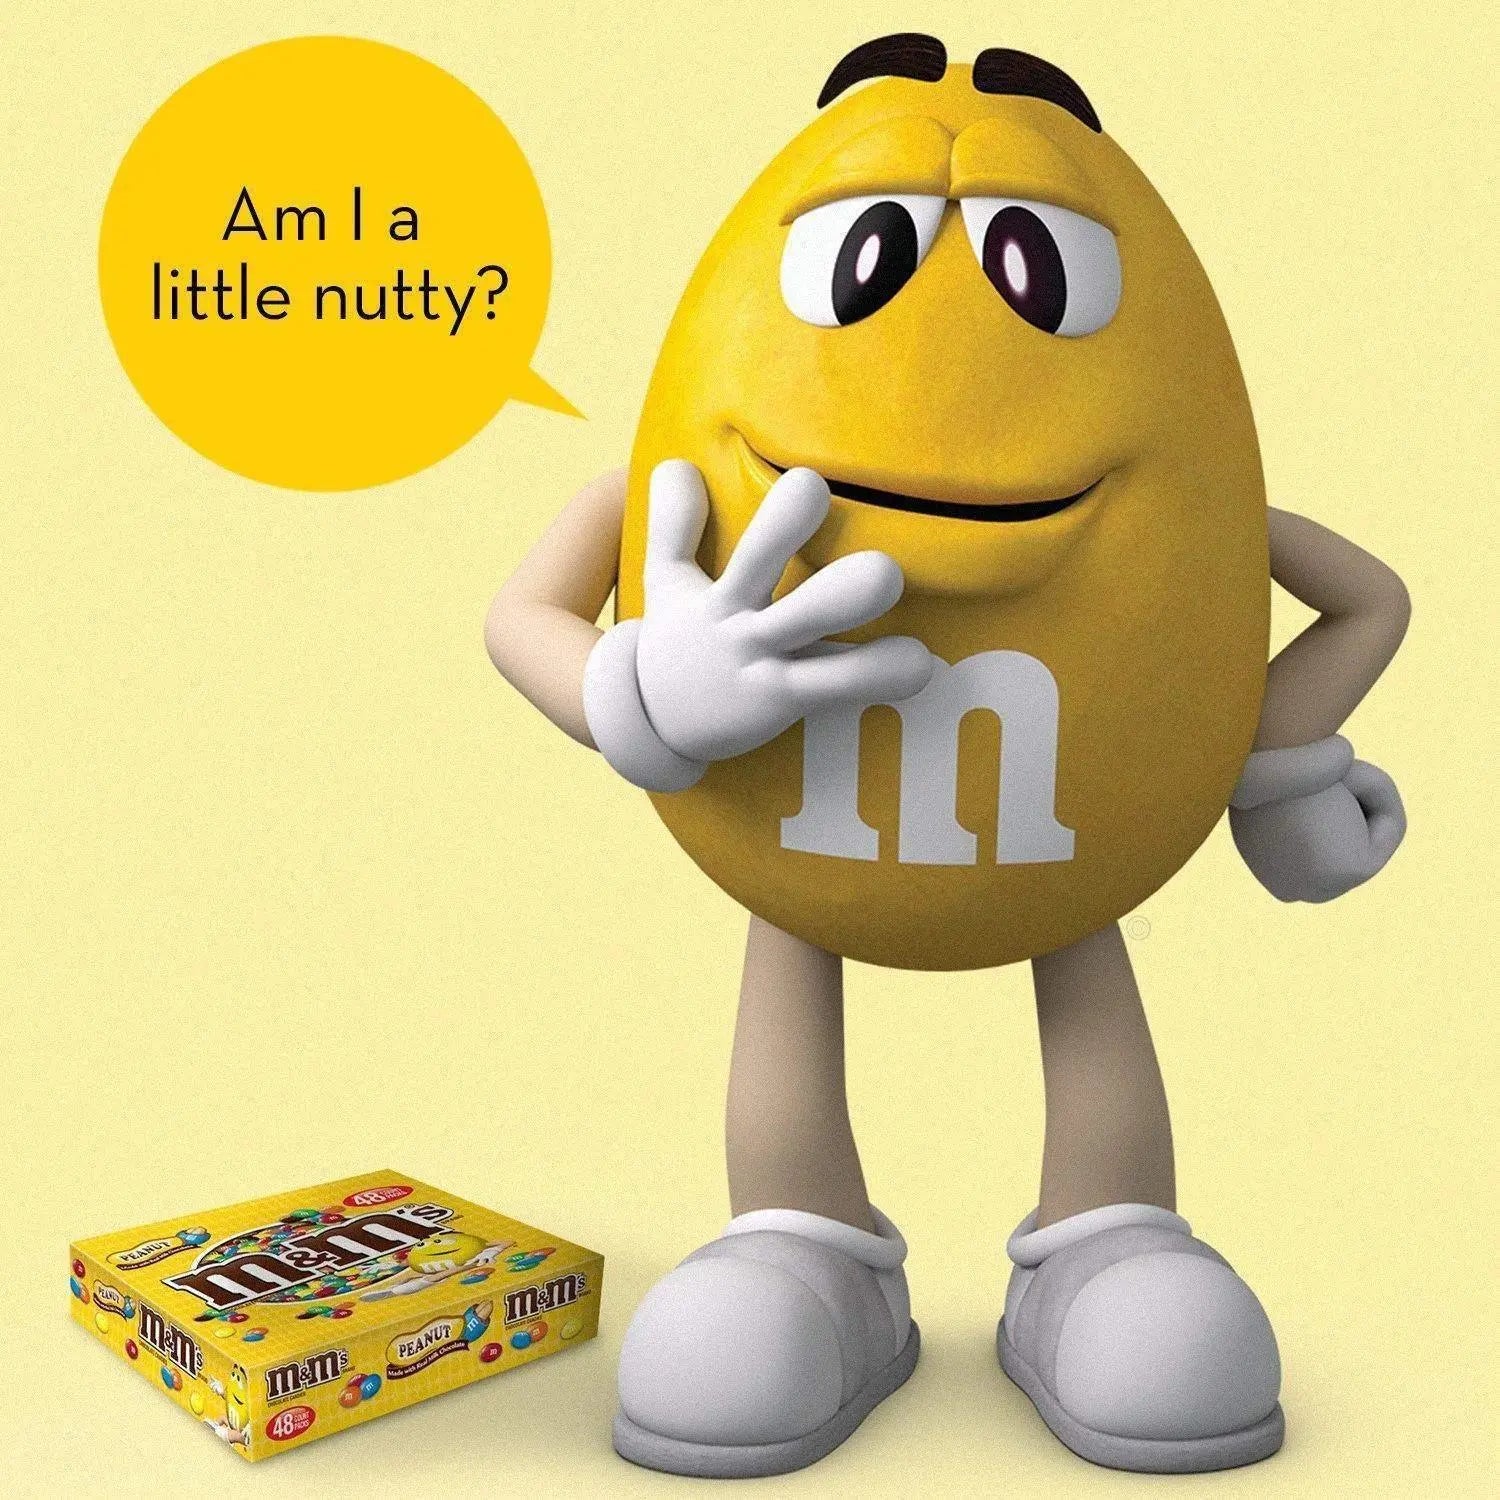 Wholesale prices with free shipping all over United States M&M'S Peanut Milk Chocolate Full Size Bulk Candy - Steven Deals